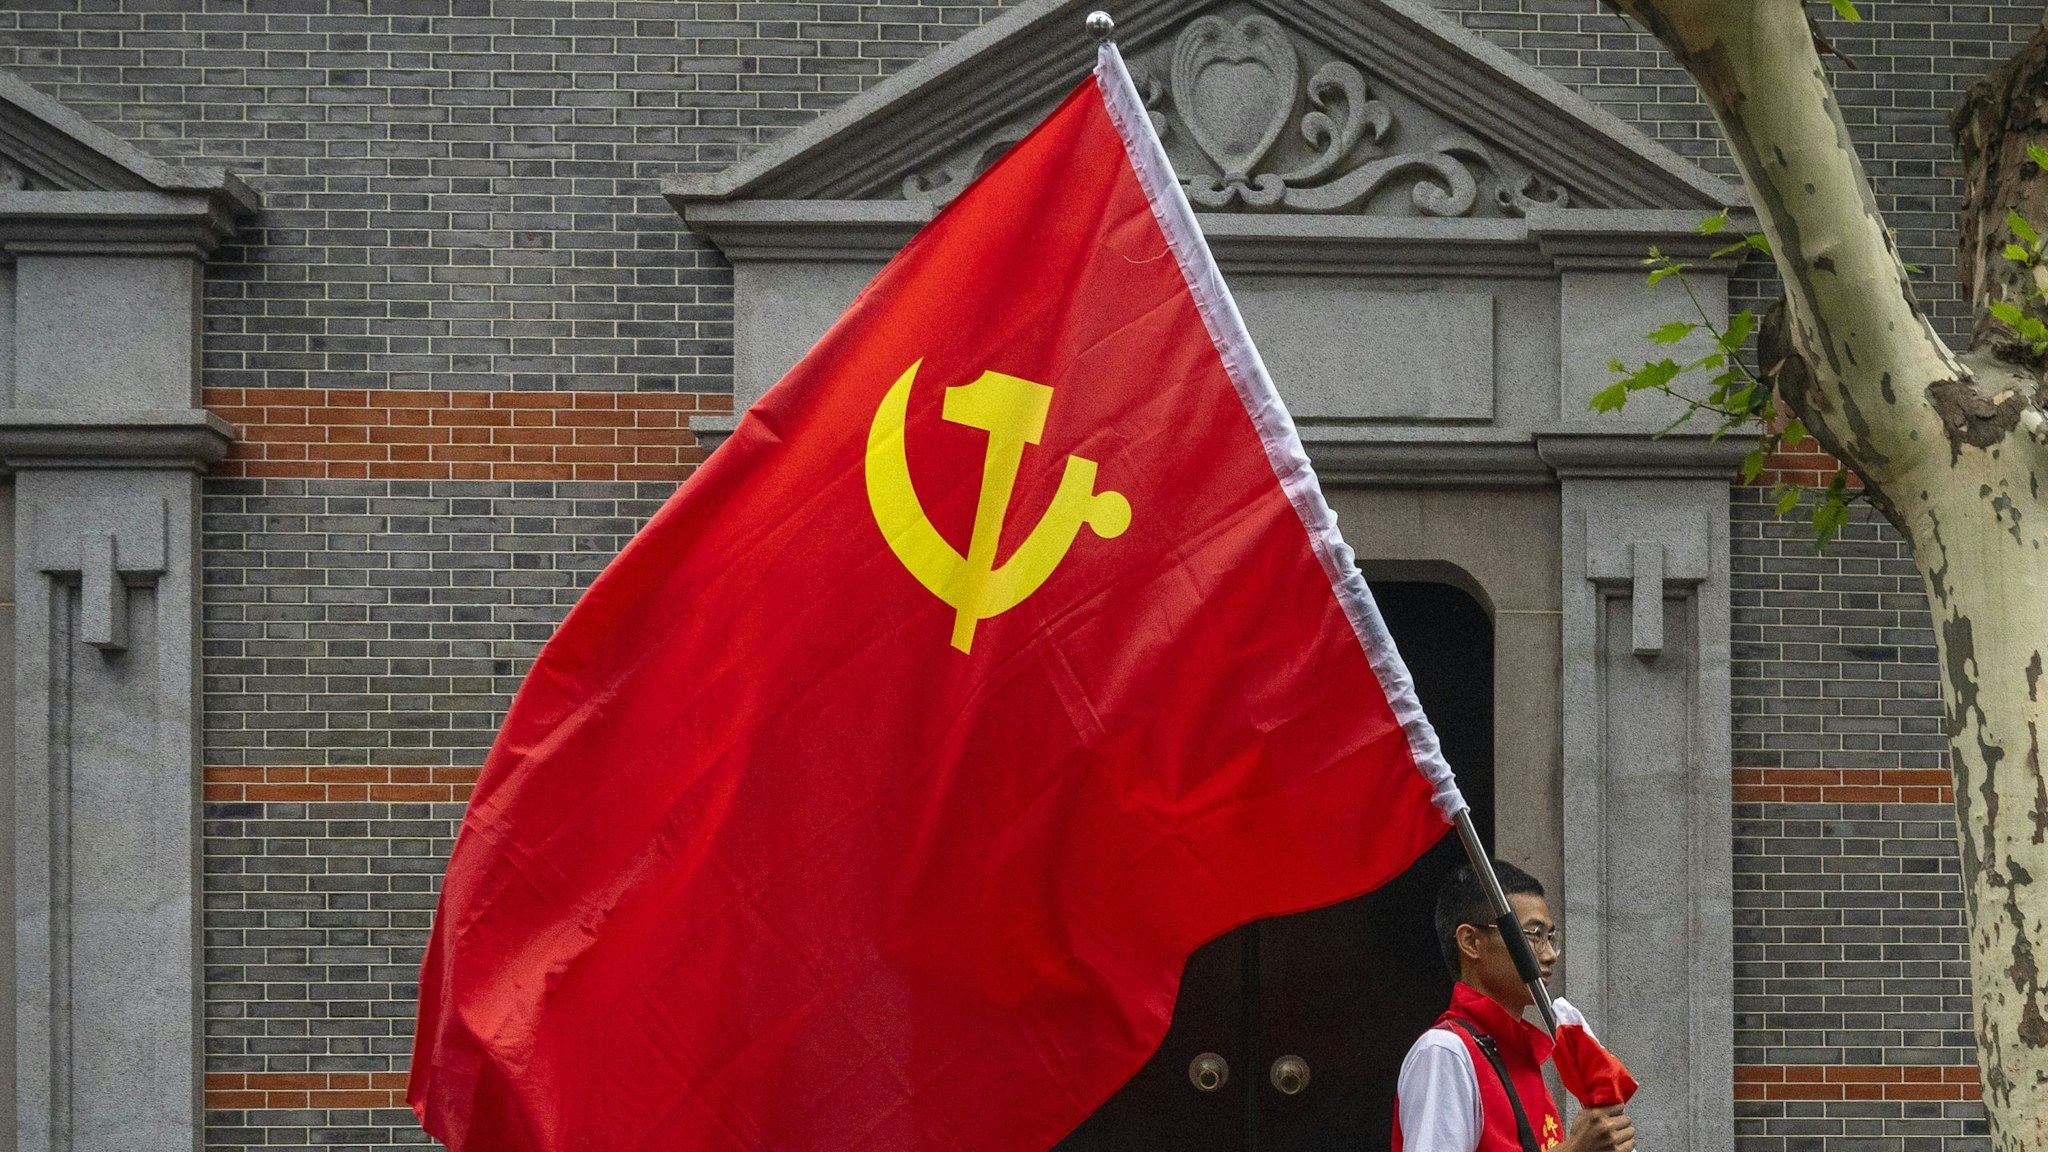 SHANGHAI, CHINA - JUNE 17: A man carries the hammer and sickle flag outside of the Memorial of the First National Congress of the Communist Party of China, on June 17, 2021 in Shanghai, China. The memorial, built where the first congress of the party was started before being interrupted by authorities in 1921, is considered, together with Nanhu Red Boat in Jiaxing, the physical birthplace of the CPC and it is one of the key sites of the so called "Red Tourism".